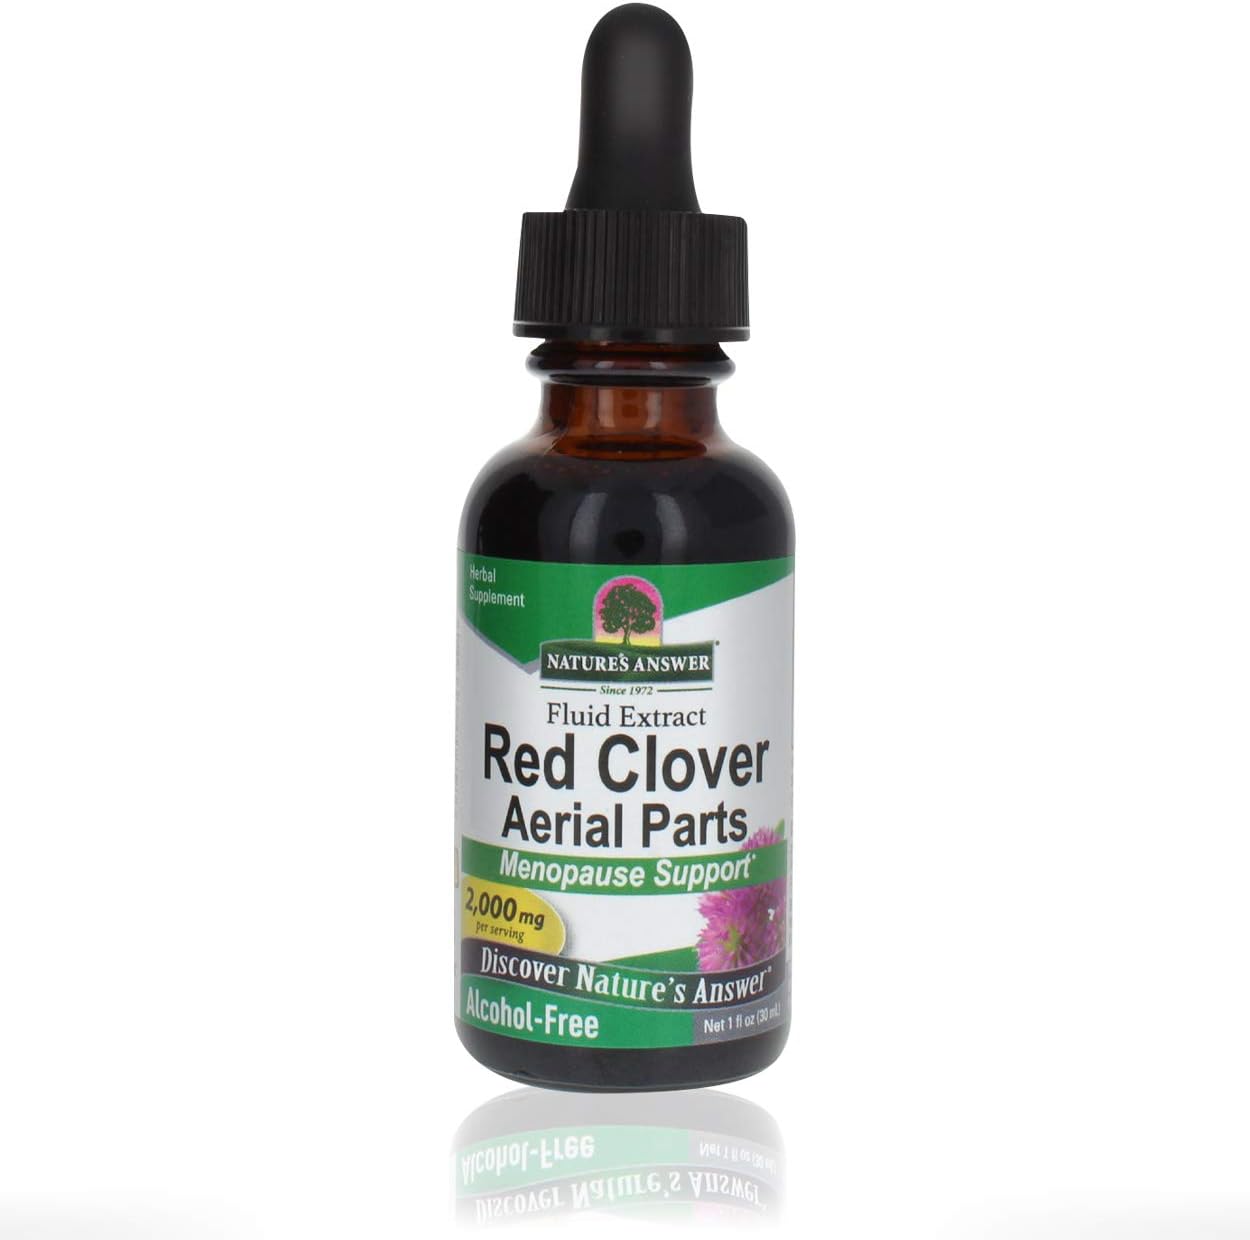 Nature’s Answer Red Clover 2000mg...